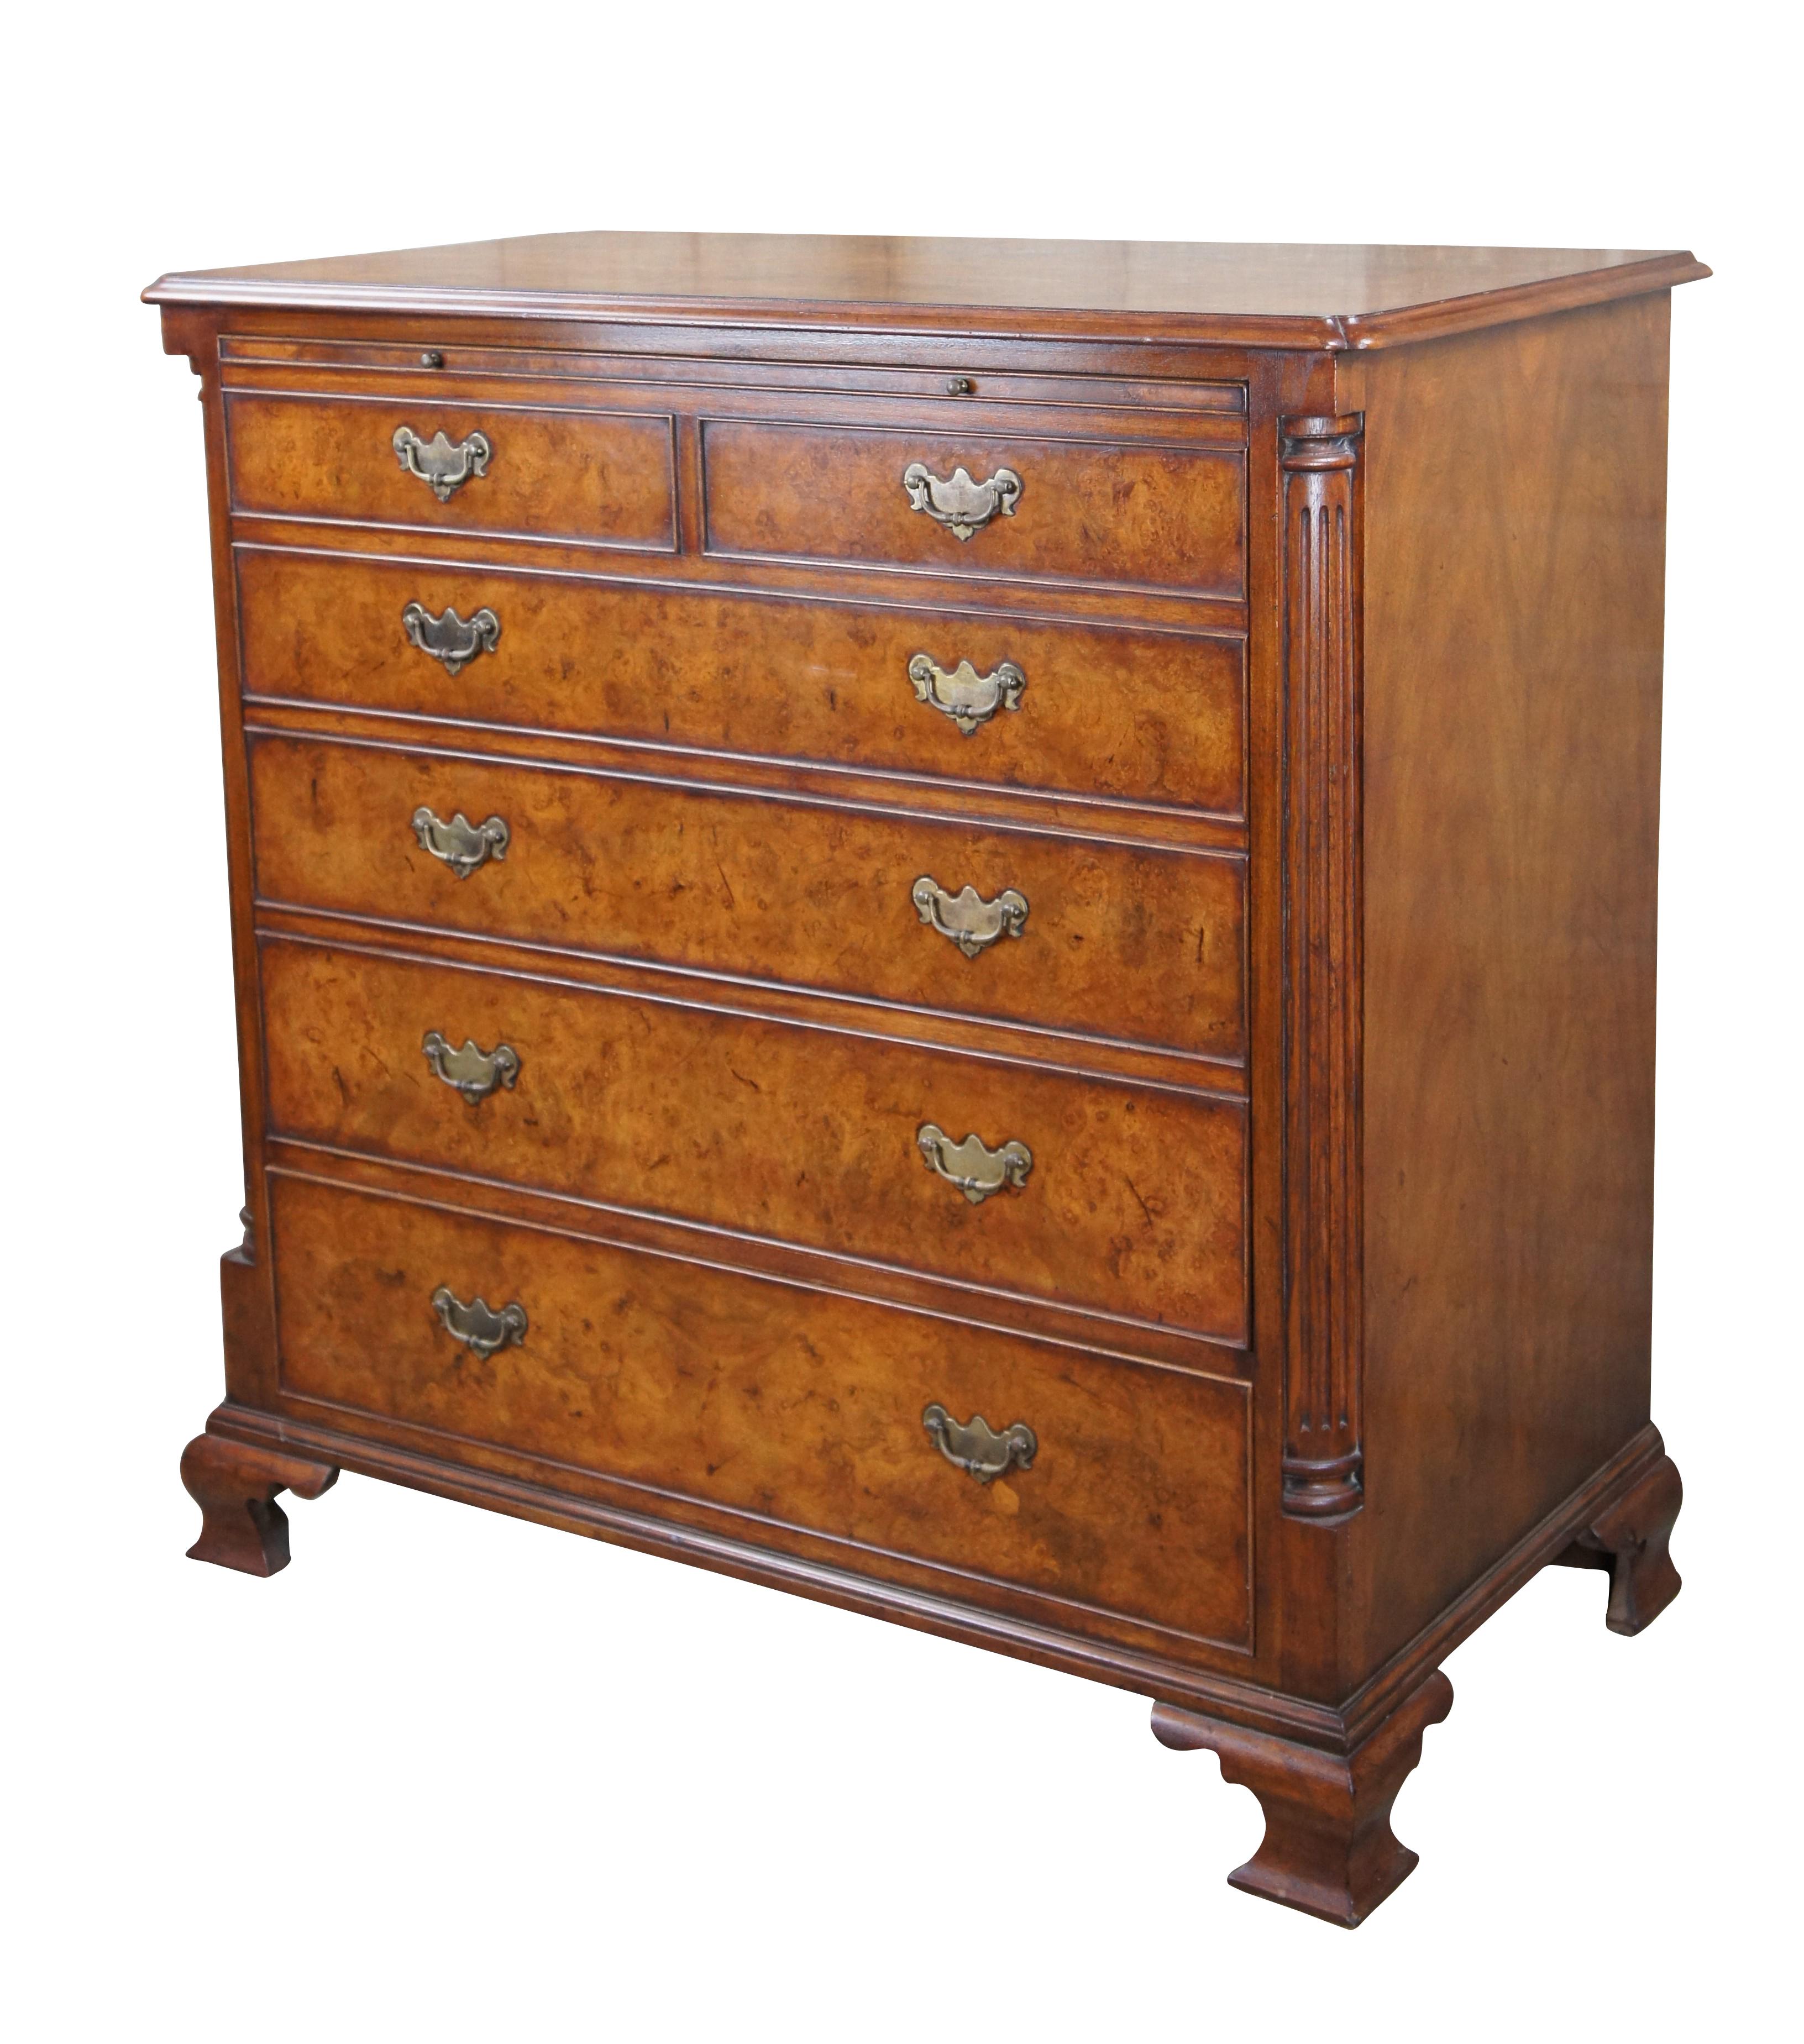 An exquisite 18th Century reproduction in the form of a bachelors chest by Arthur Brett & Sons. Made from mahogany with burled front and top. Features a faux 2 over 4 drawer graduated design which draws forward and slides back to reveal an interior